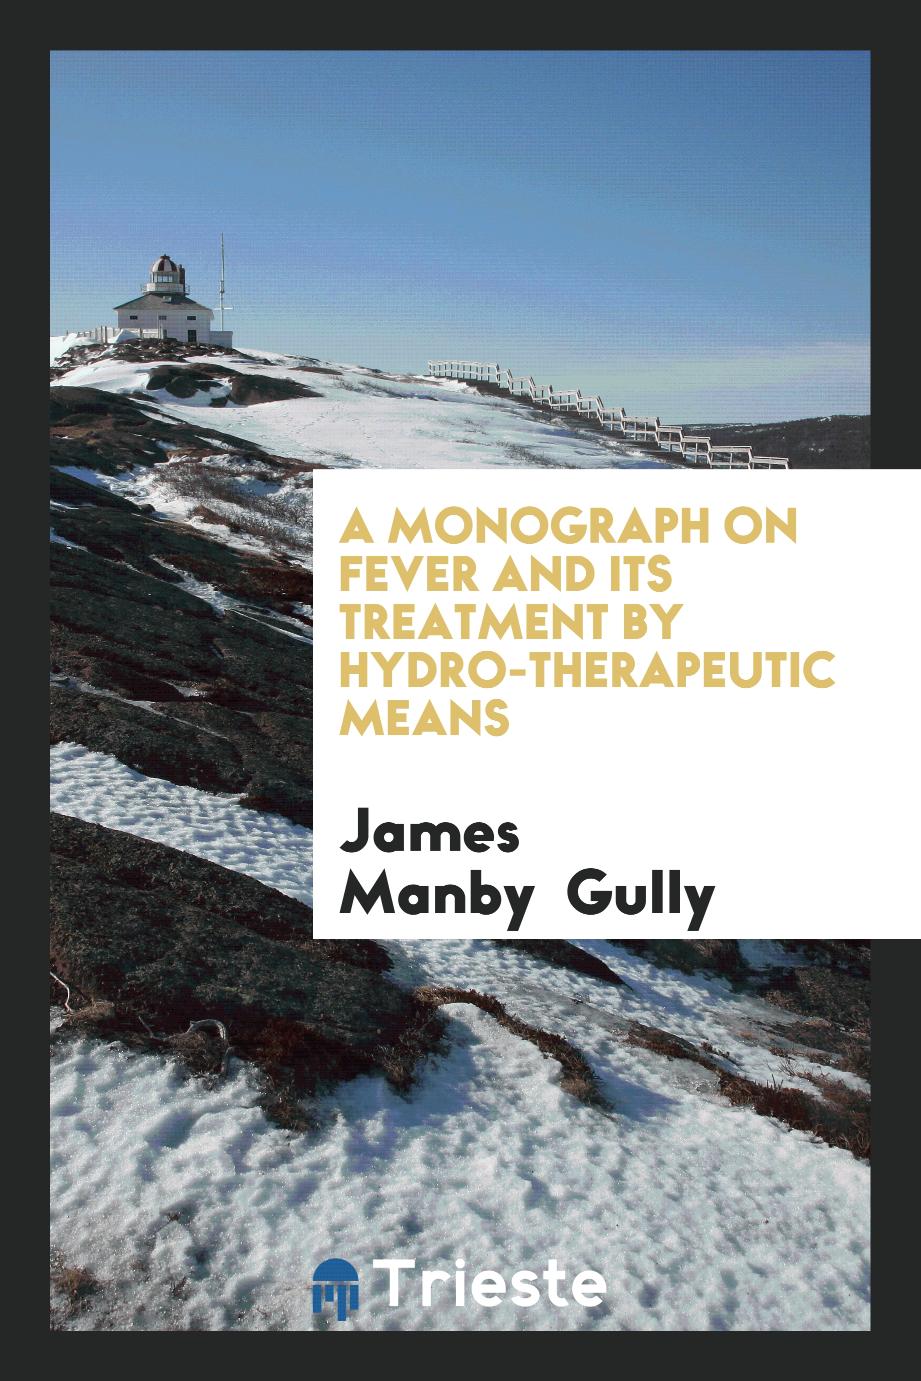 A Monograph on Fever and Its Treatment by Hydro-Therapeutic Means